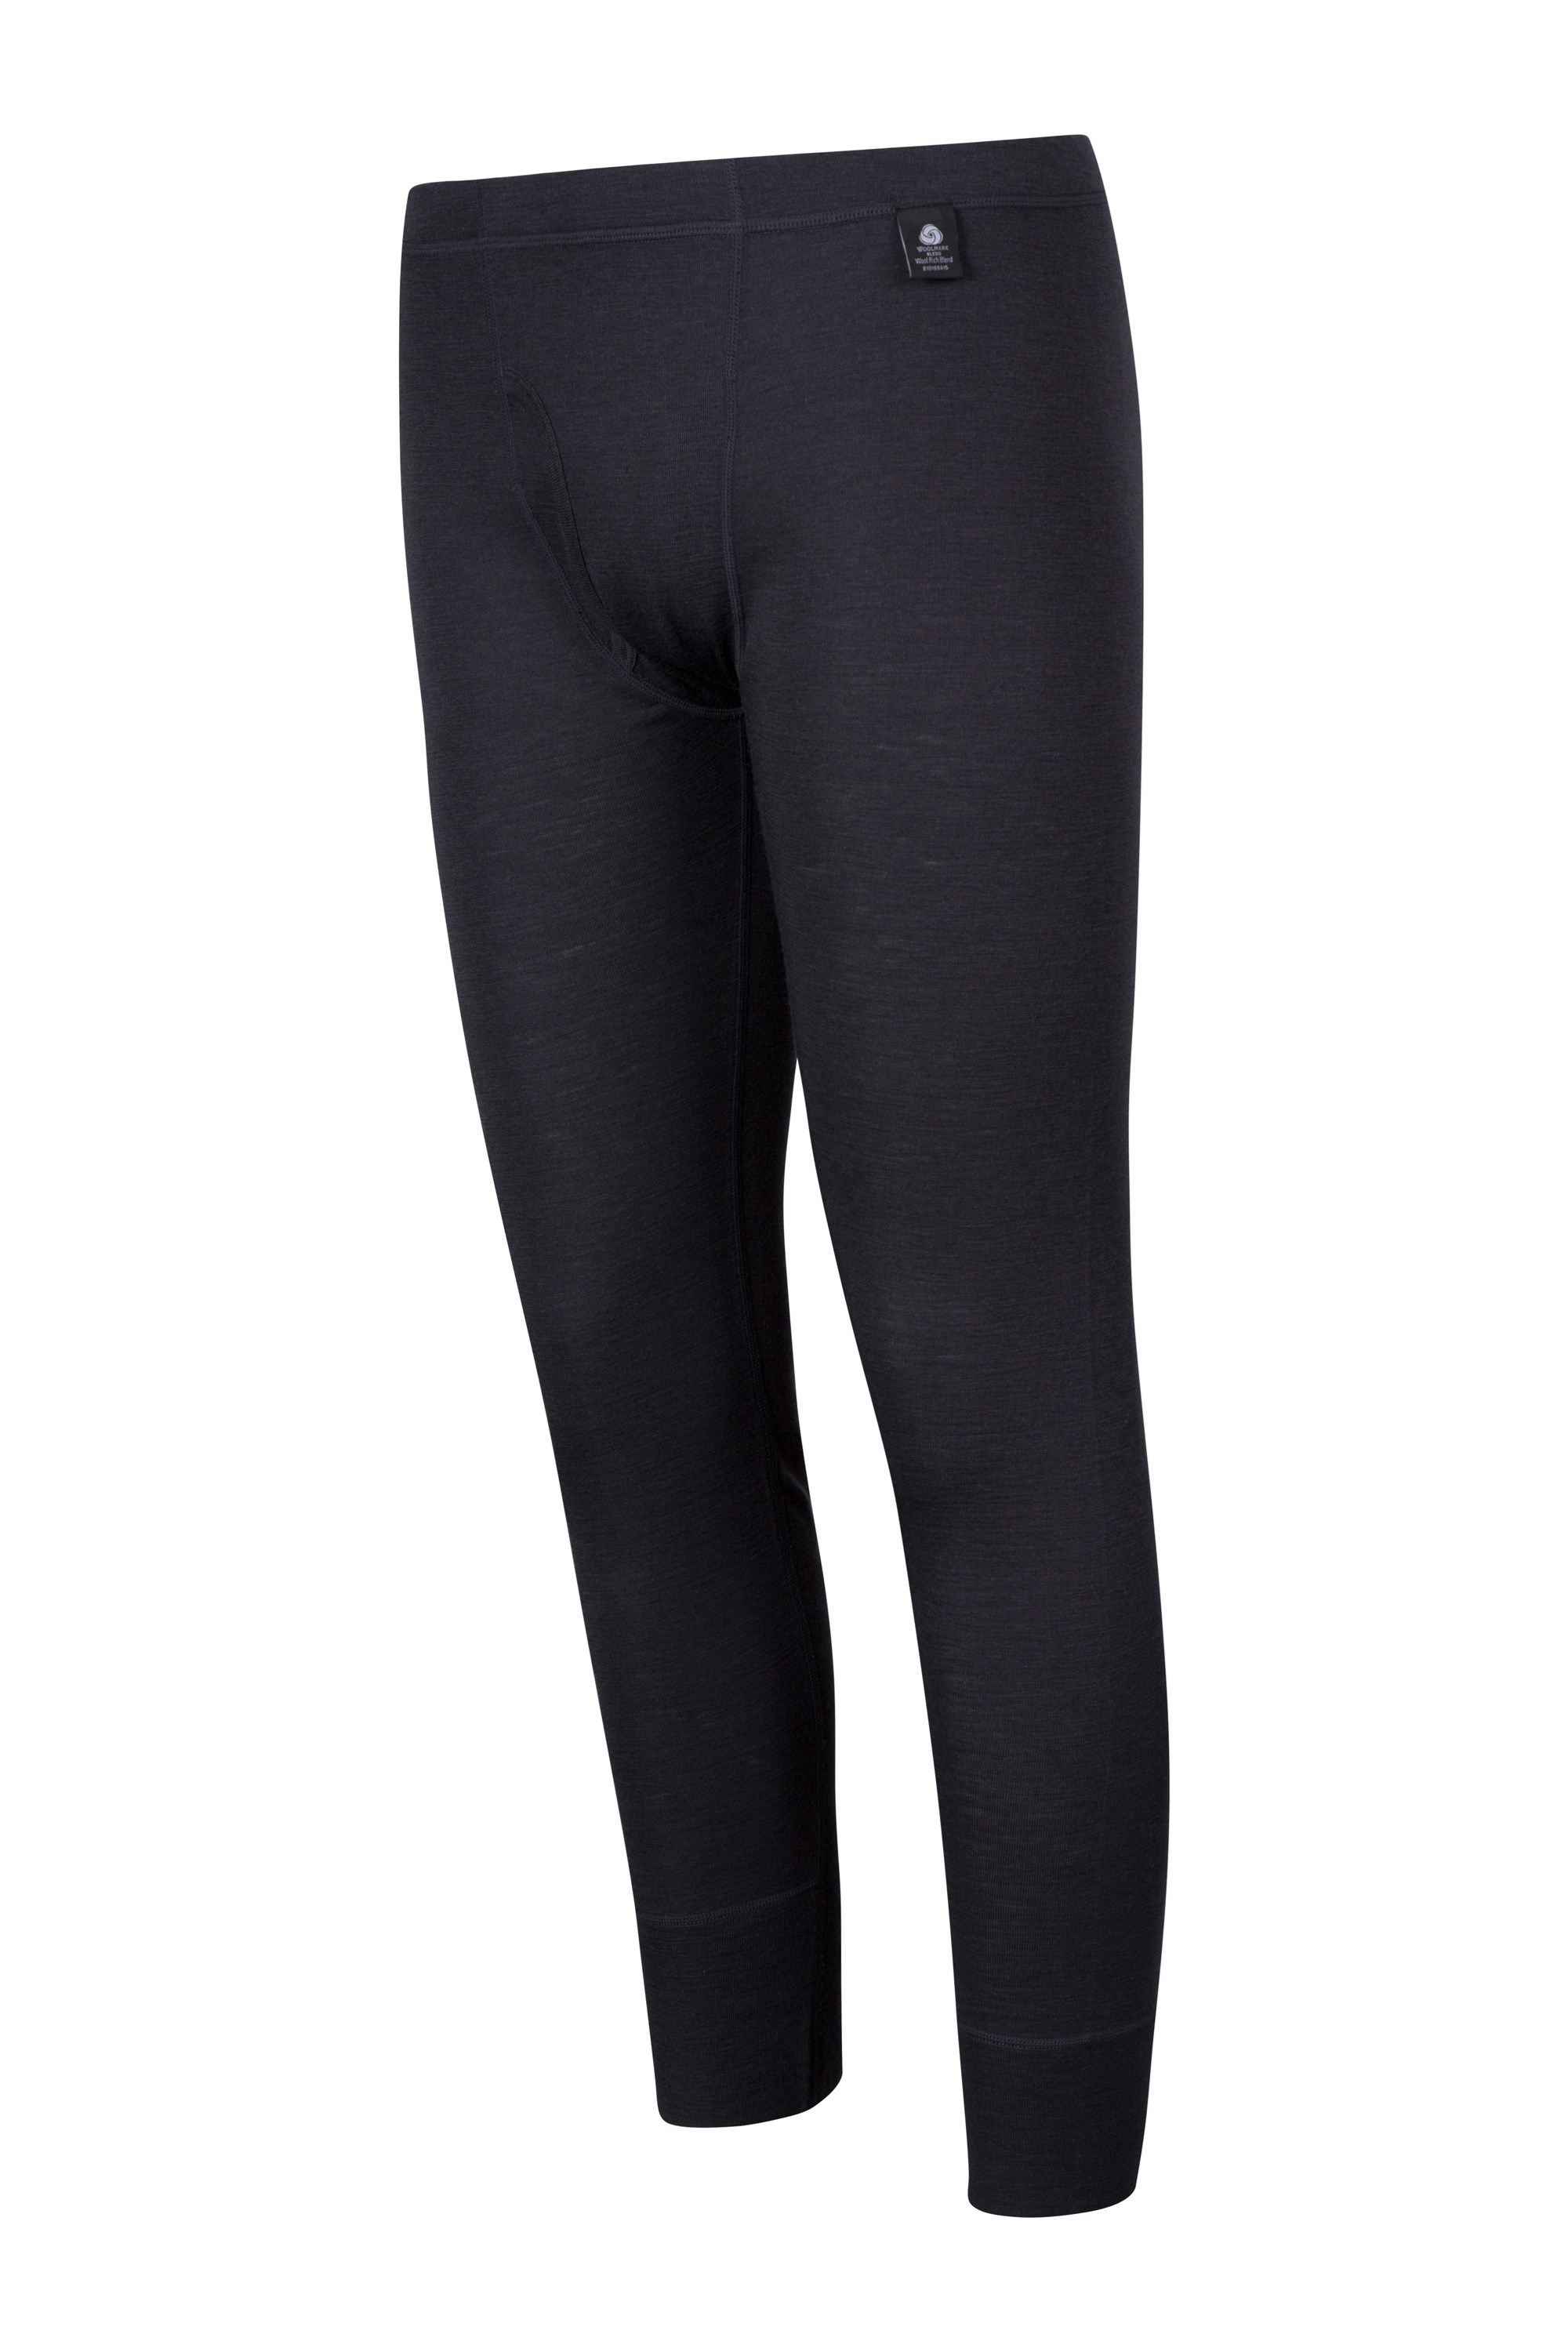 Mountain Warehouse Black NEW Various Mens Isotherm Merino pant or top